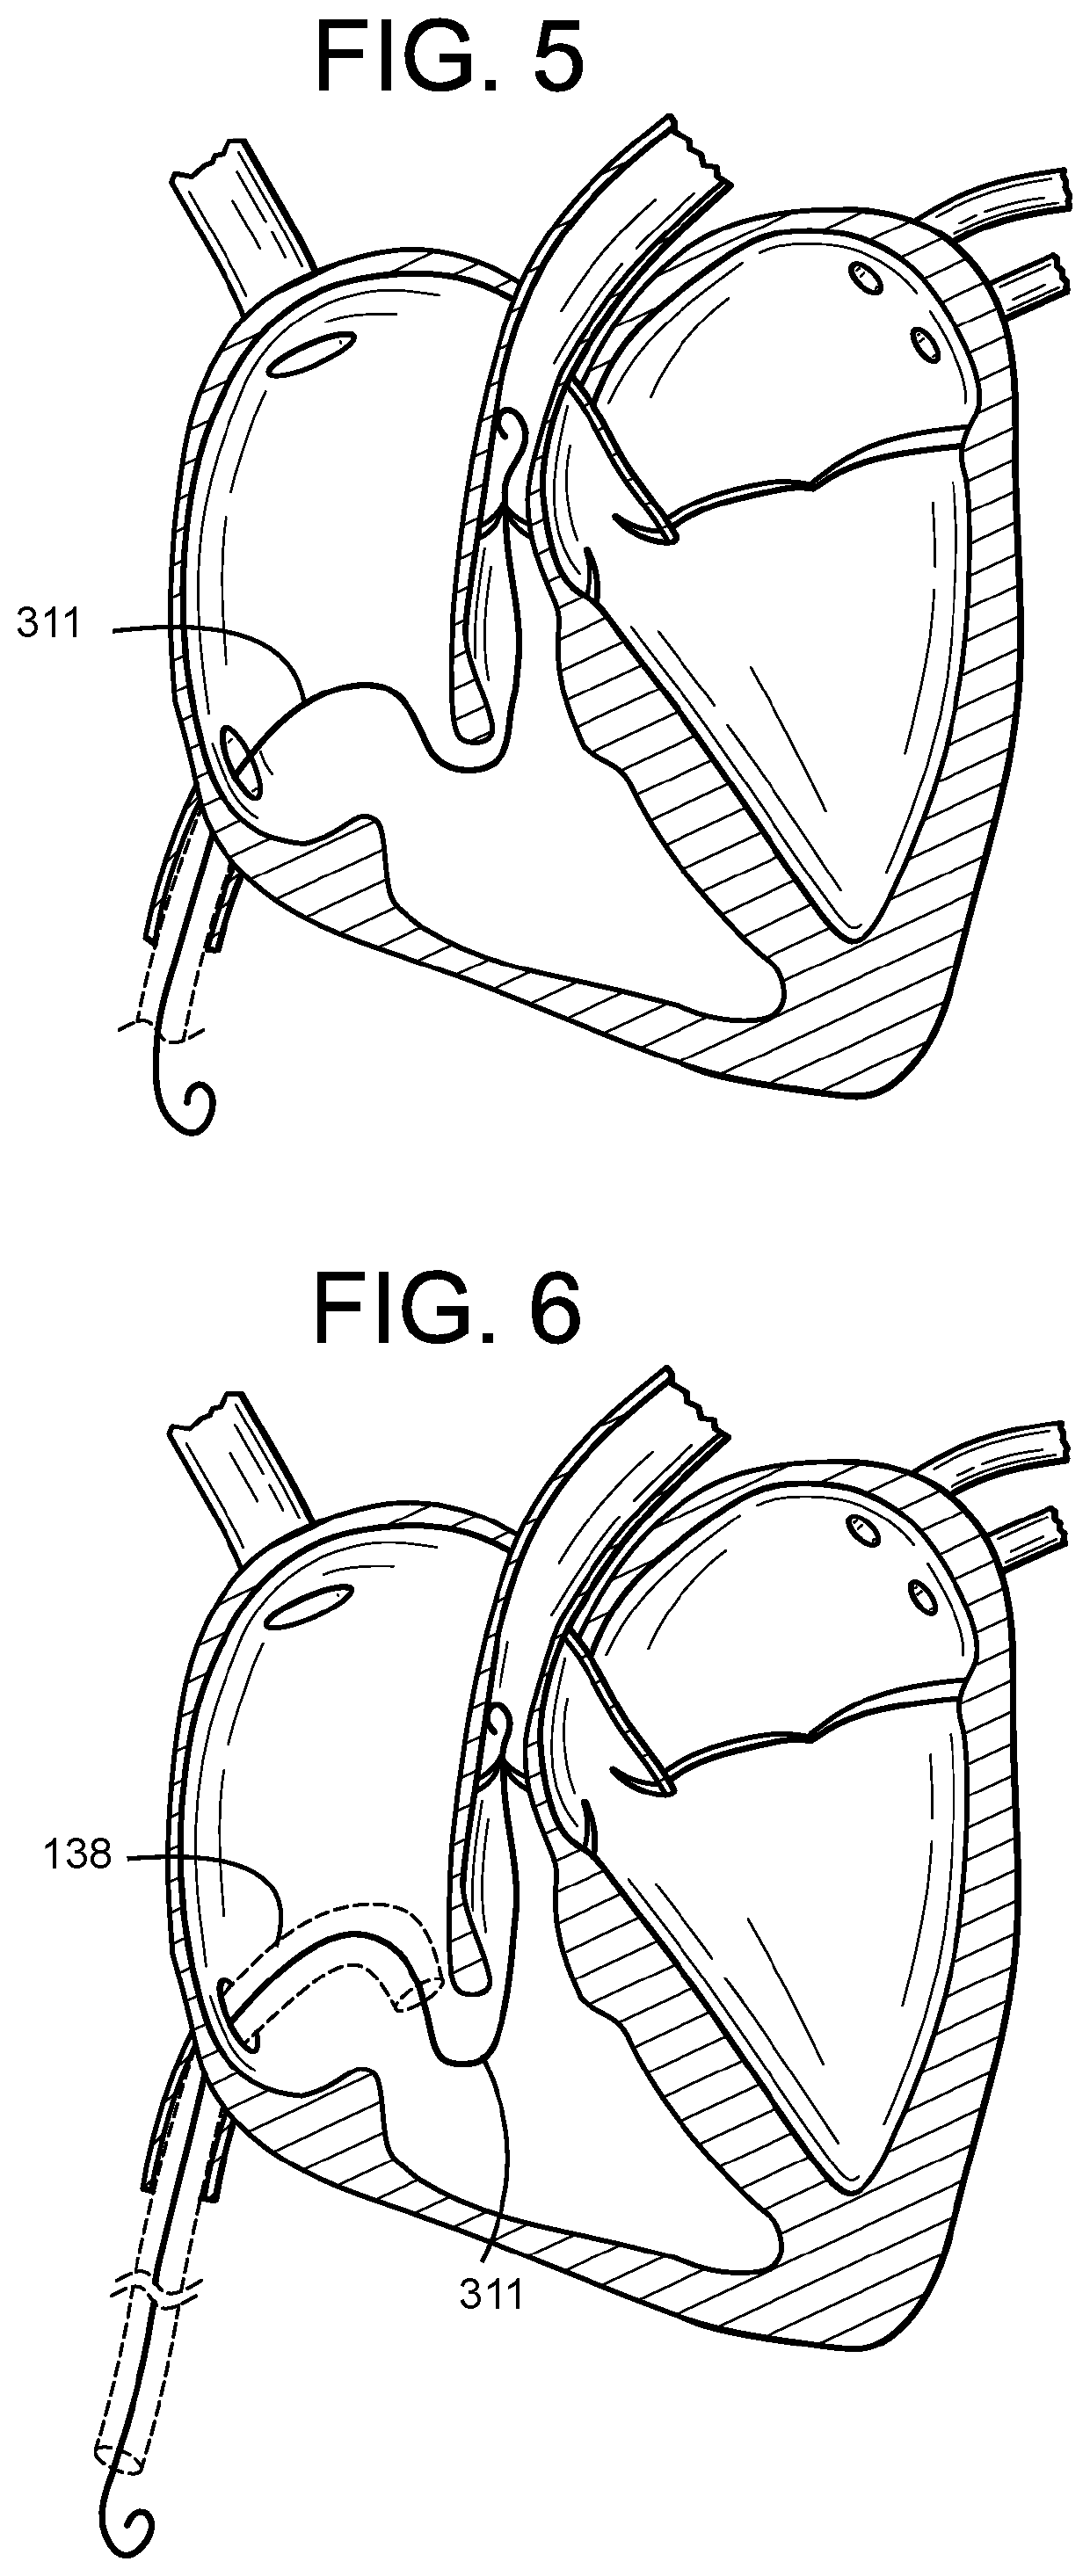 Guidewire Delivery of Transcatheter Heart Valve